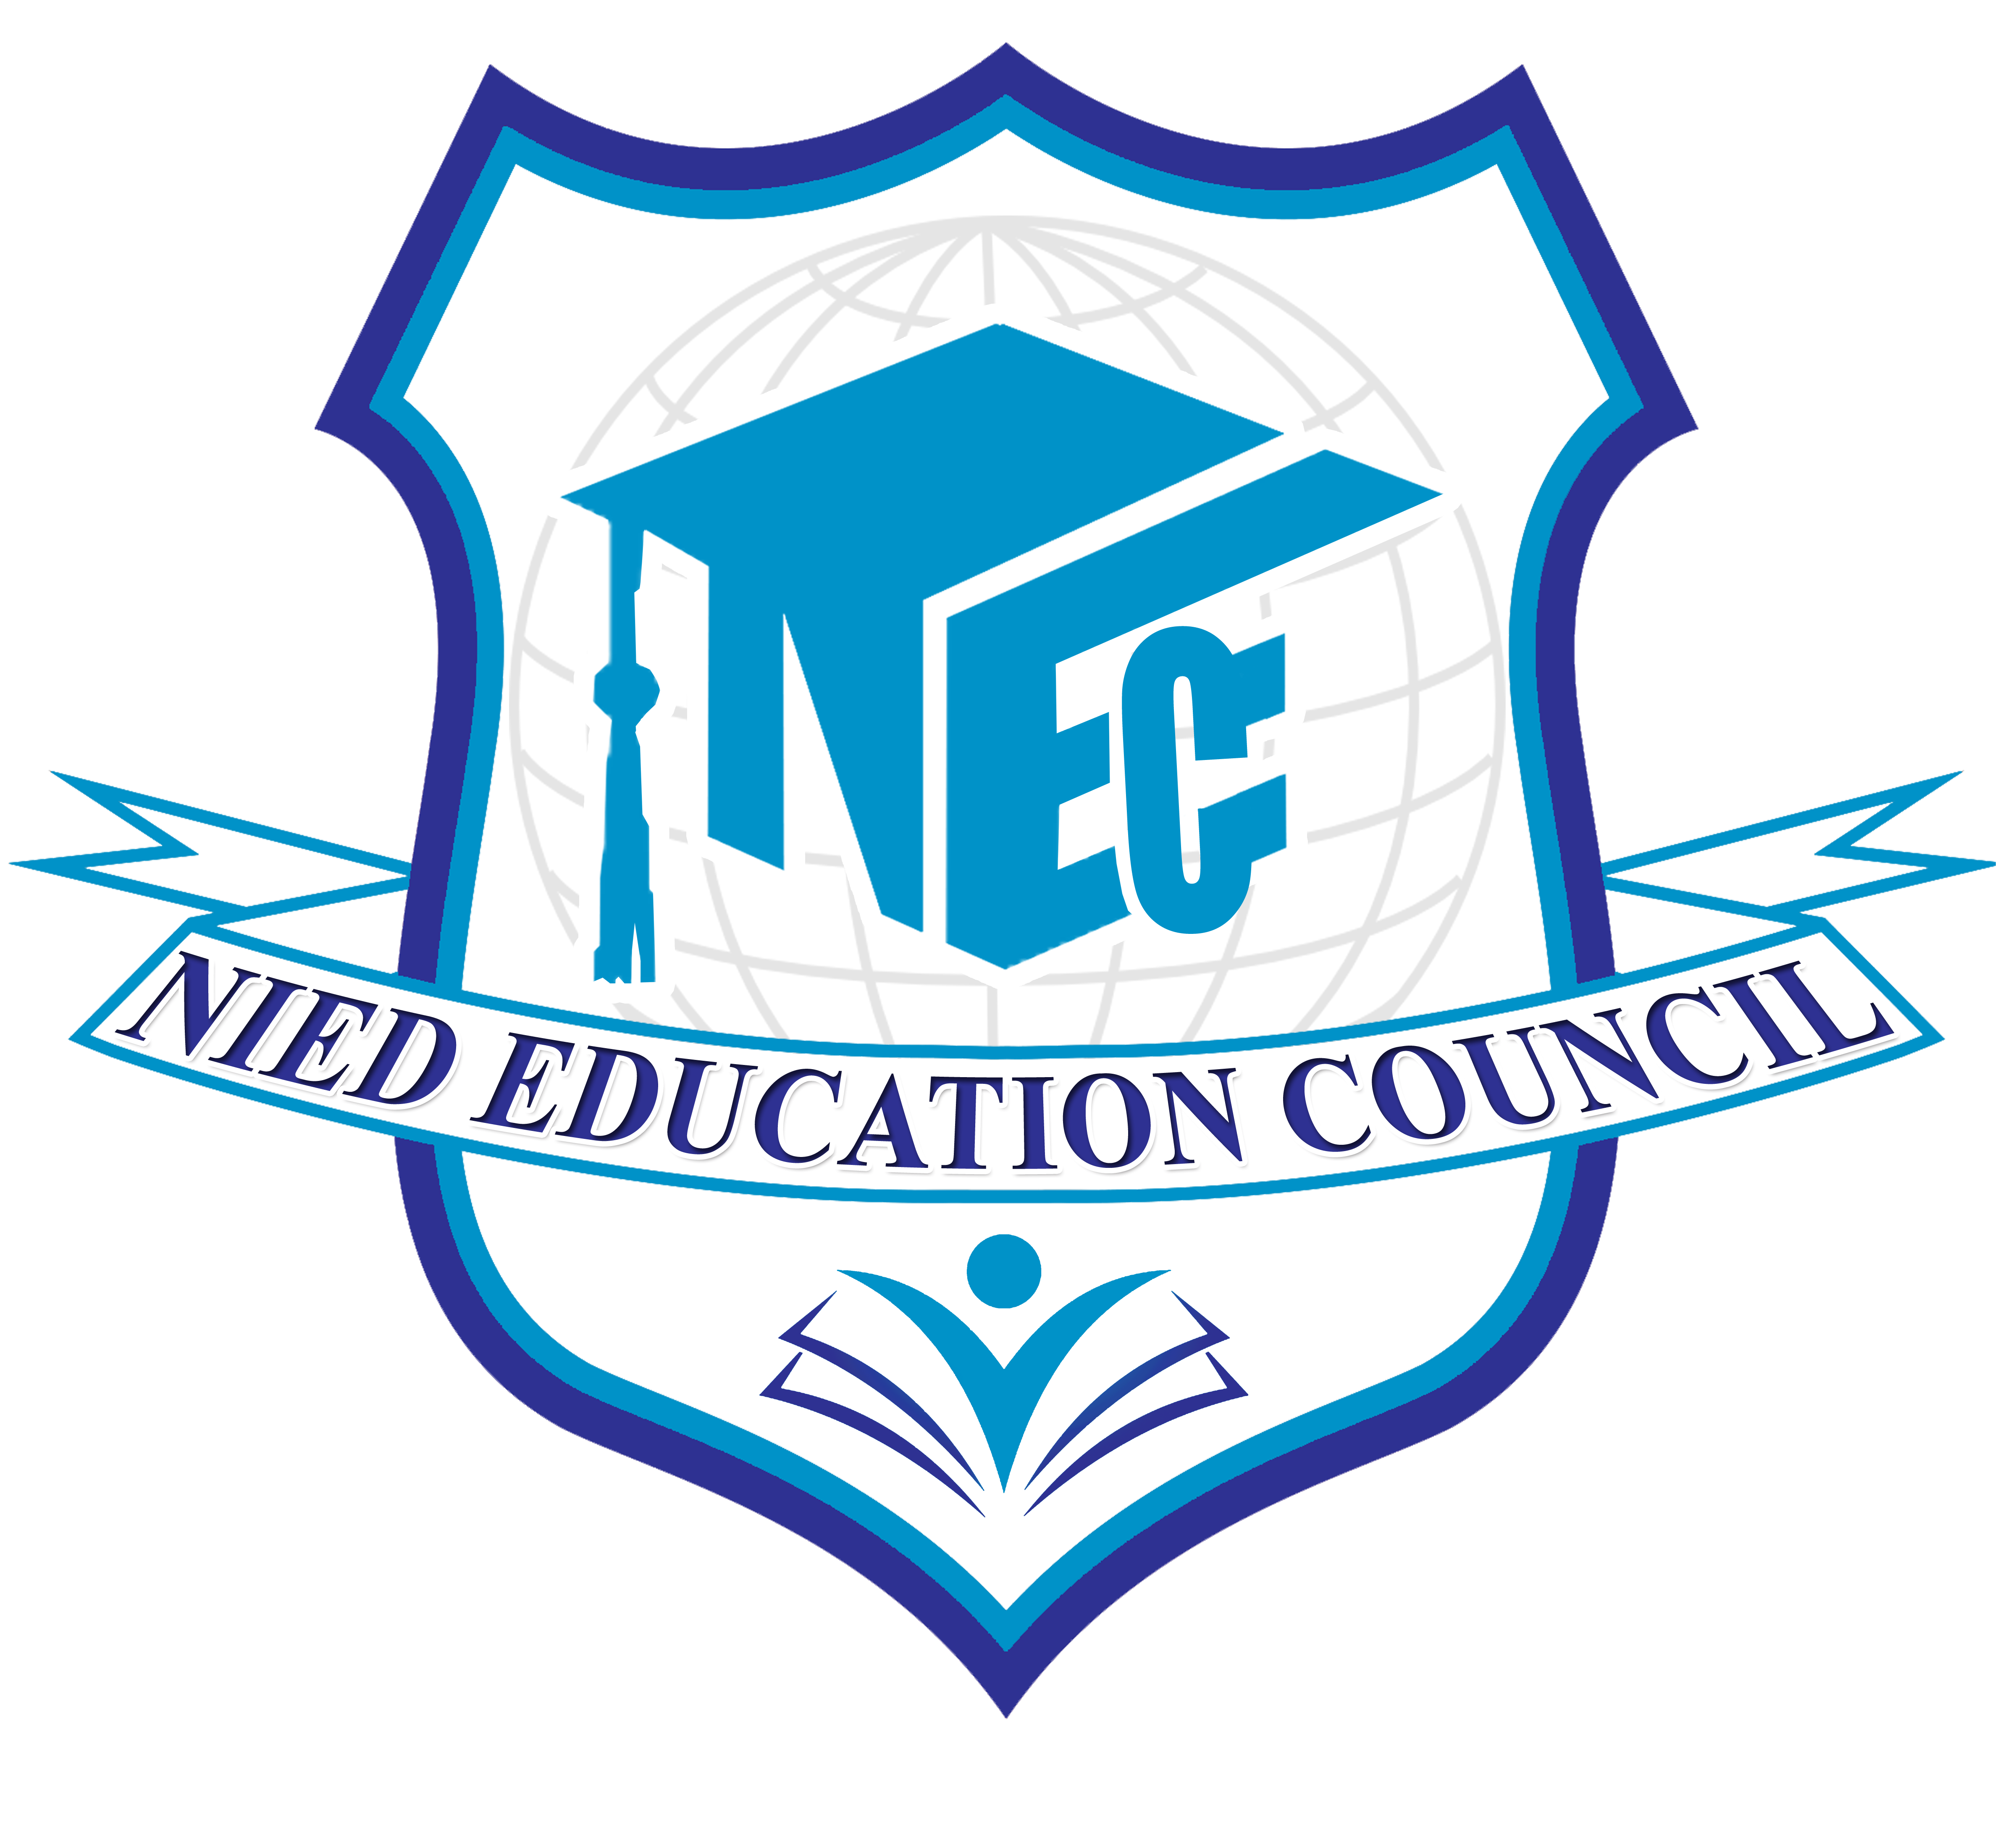 NIED EDUCATION COUNCIL